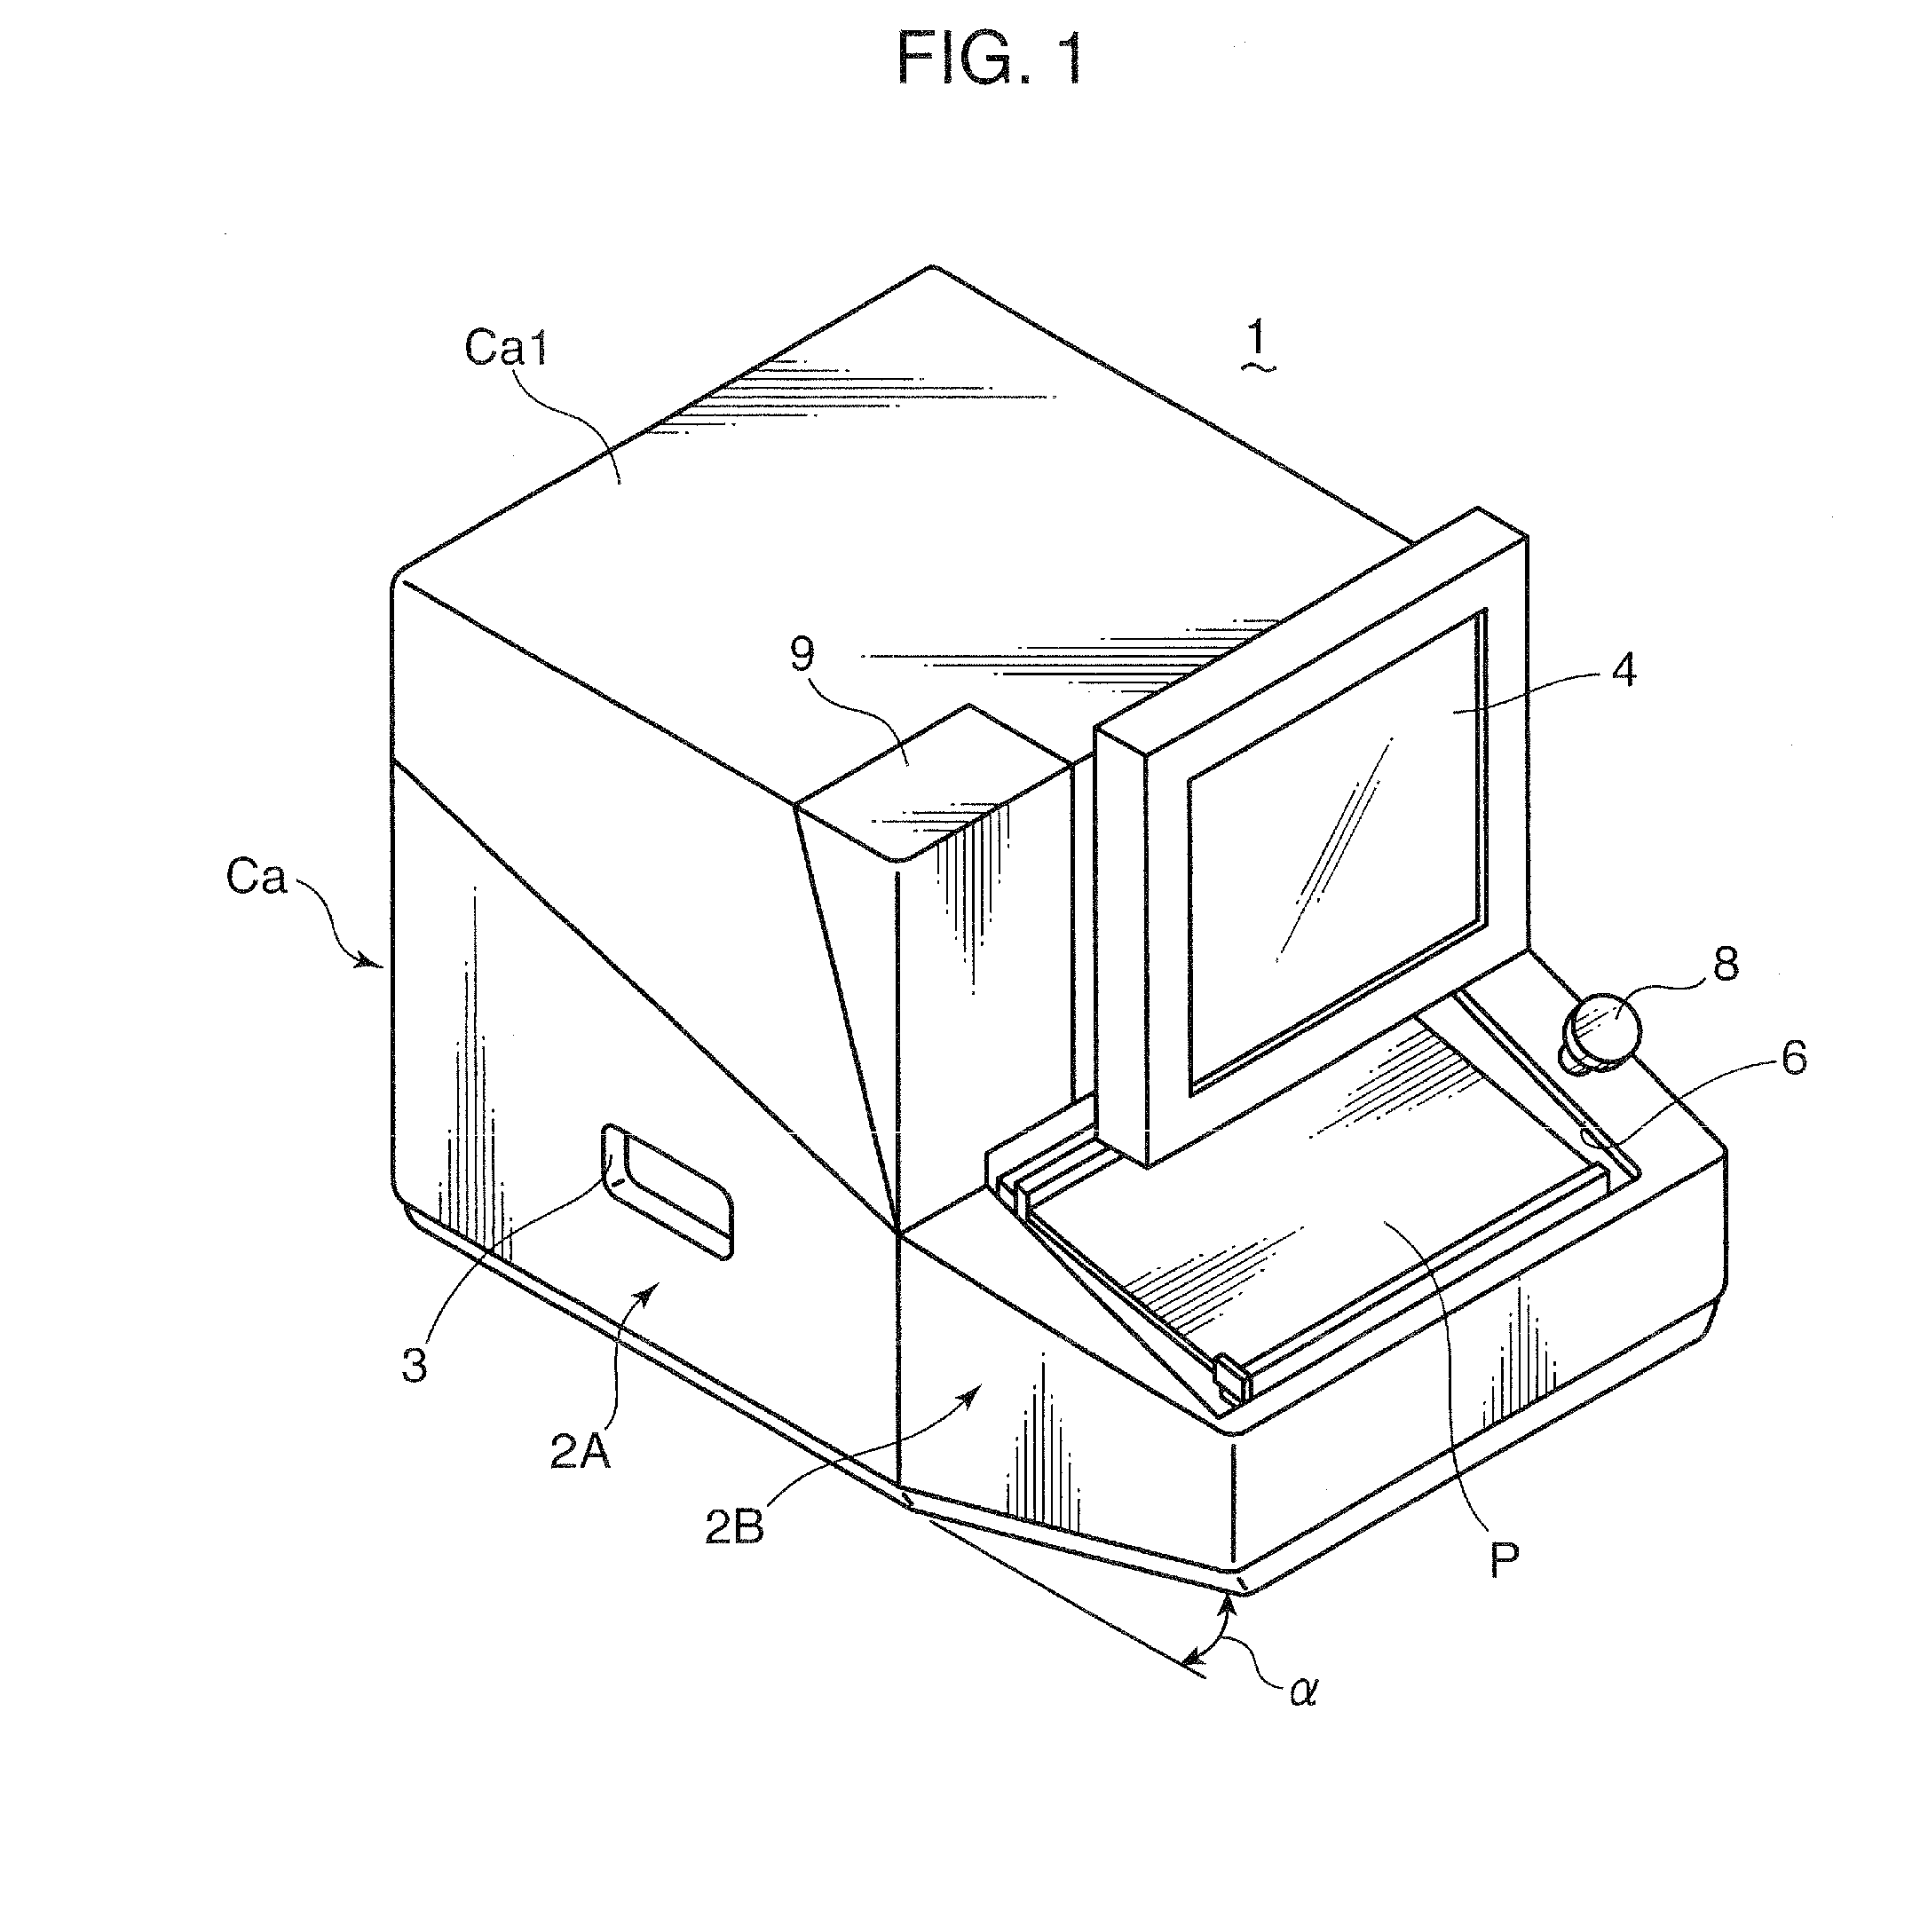 Board appearance inspection method and device